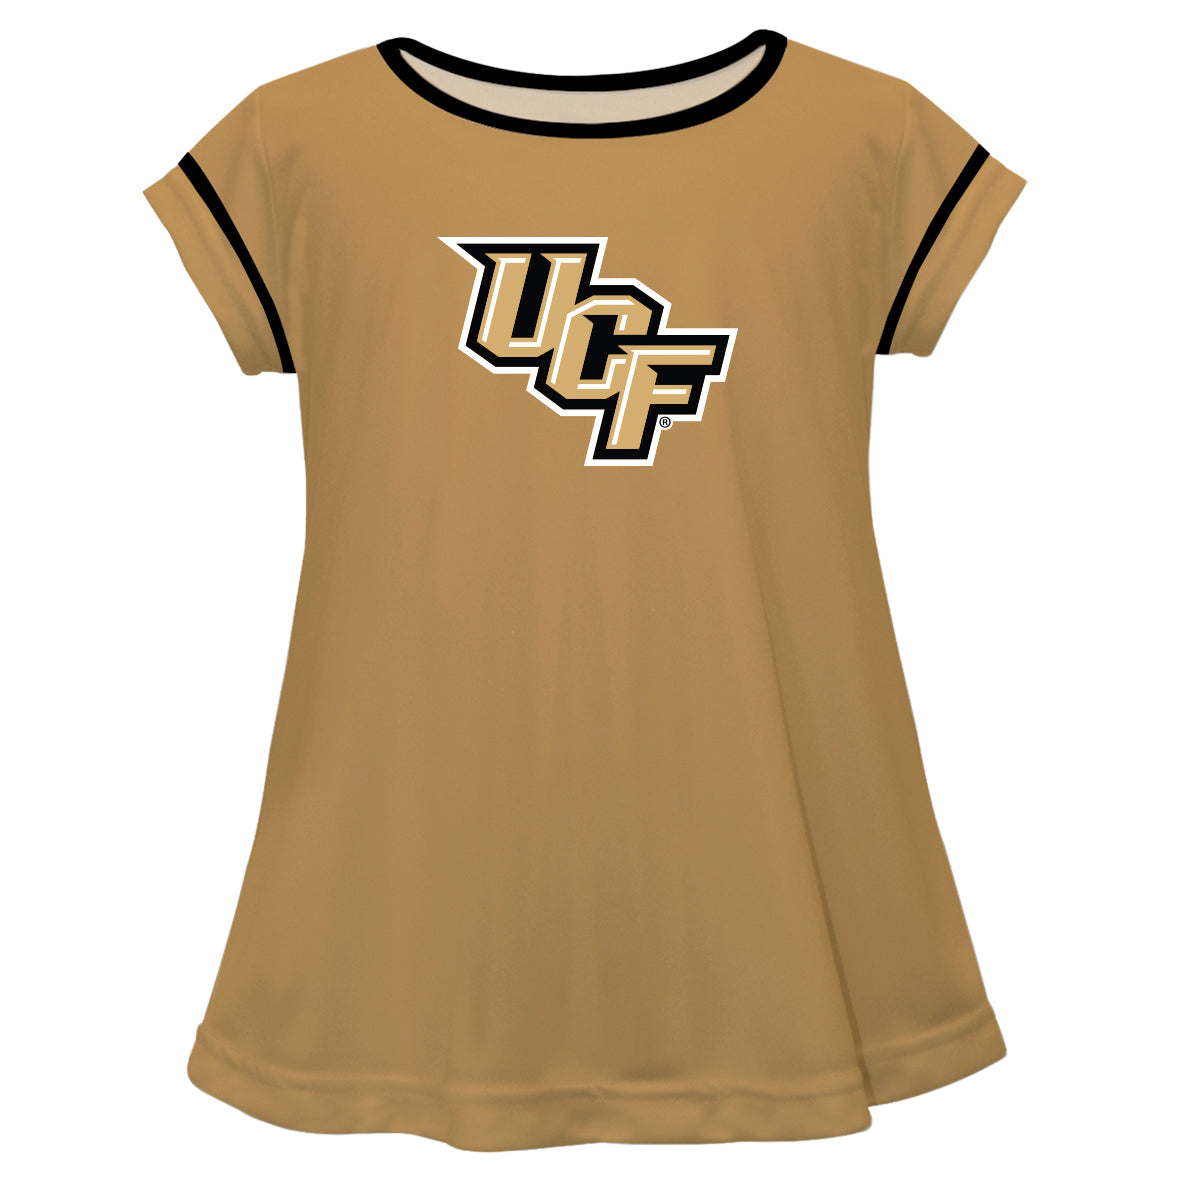 Central Florida Solid Gold Girls Laurie Top Short Sleeve by Vive La Fete